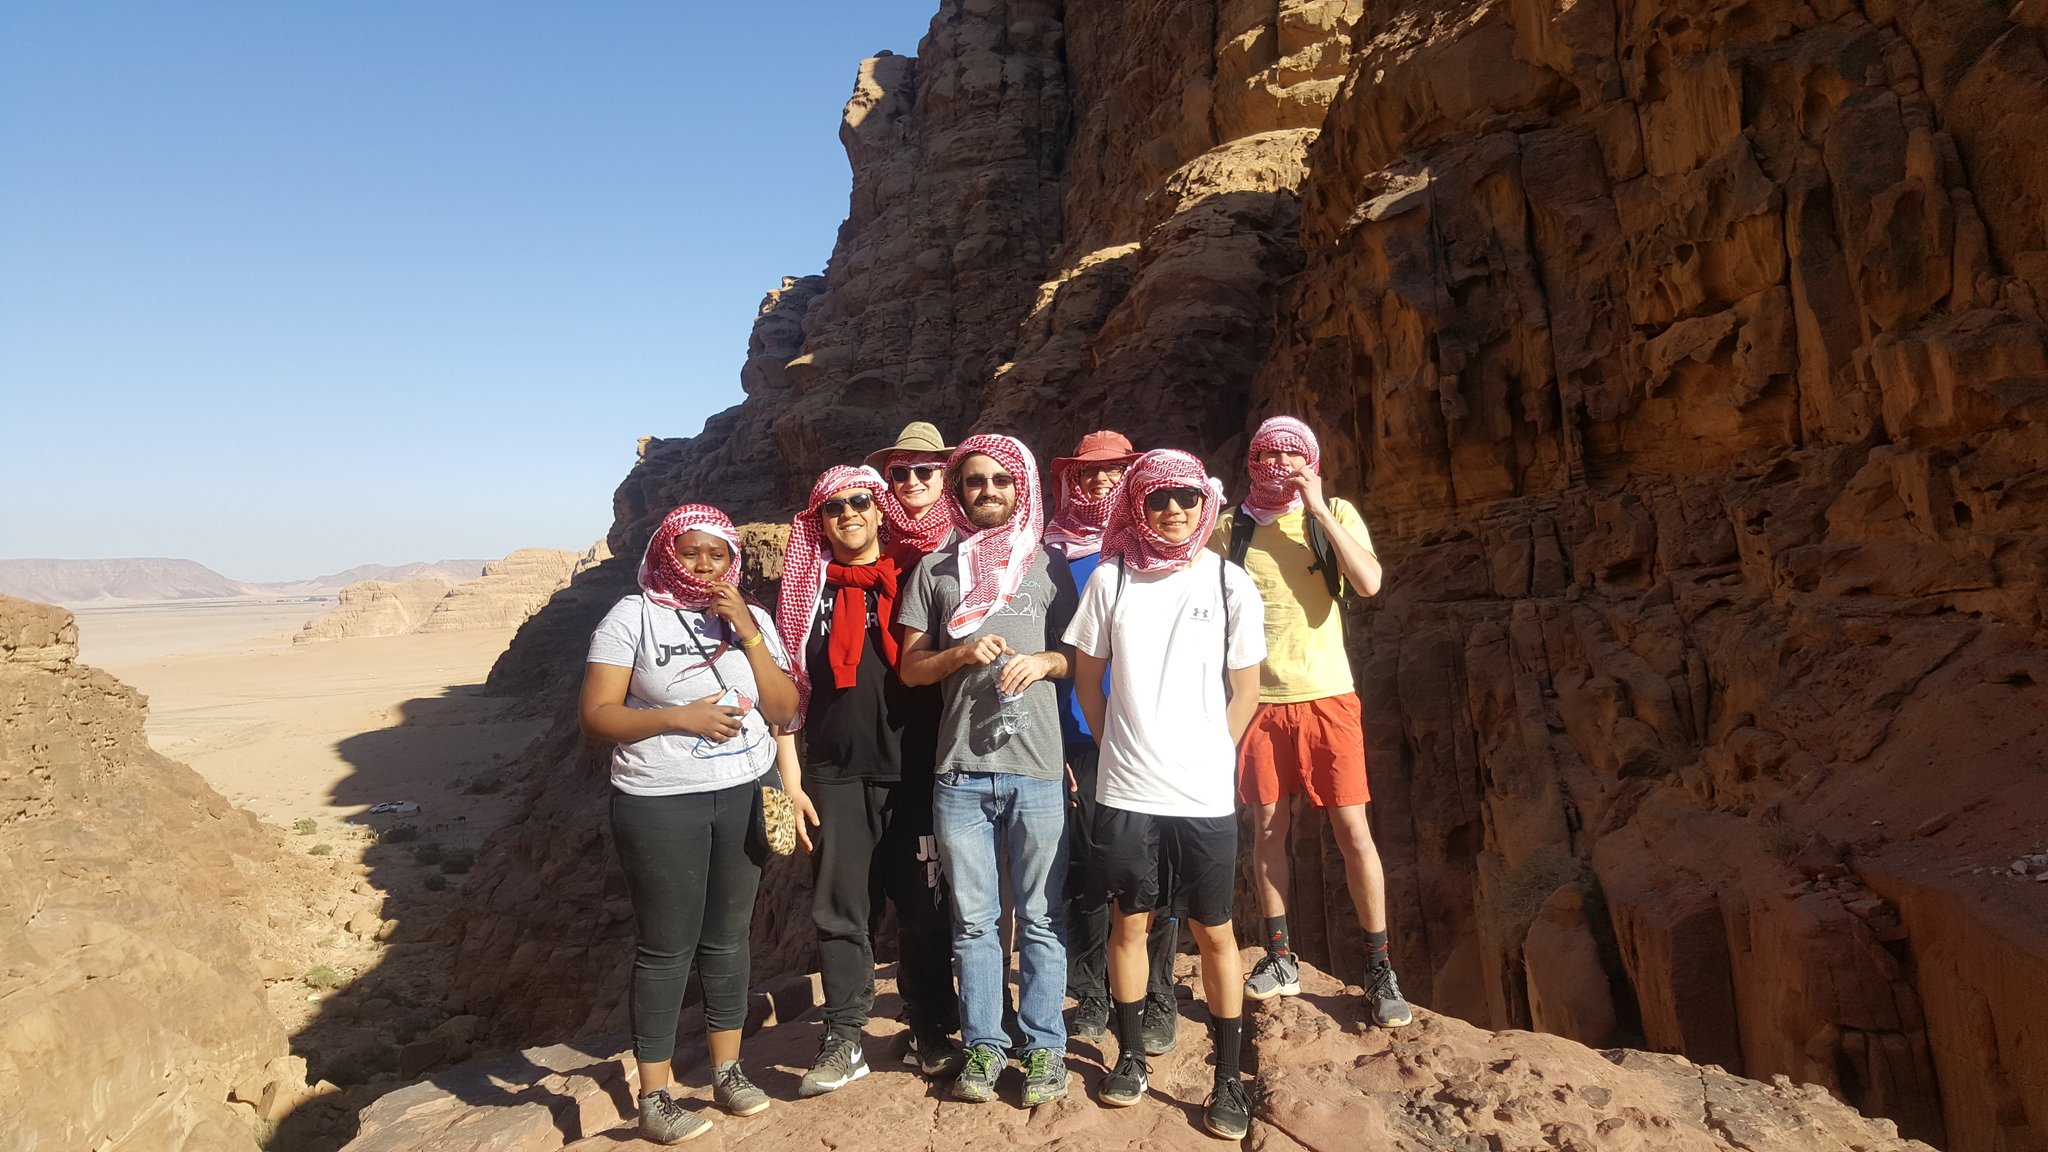 In addition to learning dynamic programming problem-solving strategies at Princess Sumaya University for Technology, the five Nebraska students also visited local world heritage sites and participated in cultural workshops. Courtesy photo from Tareq Daher.